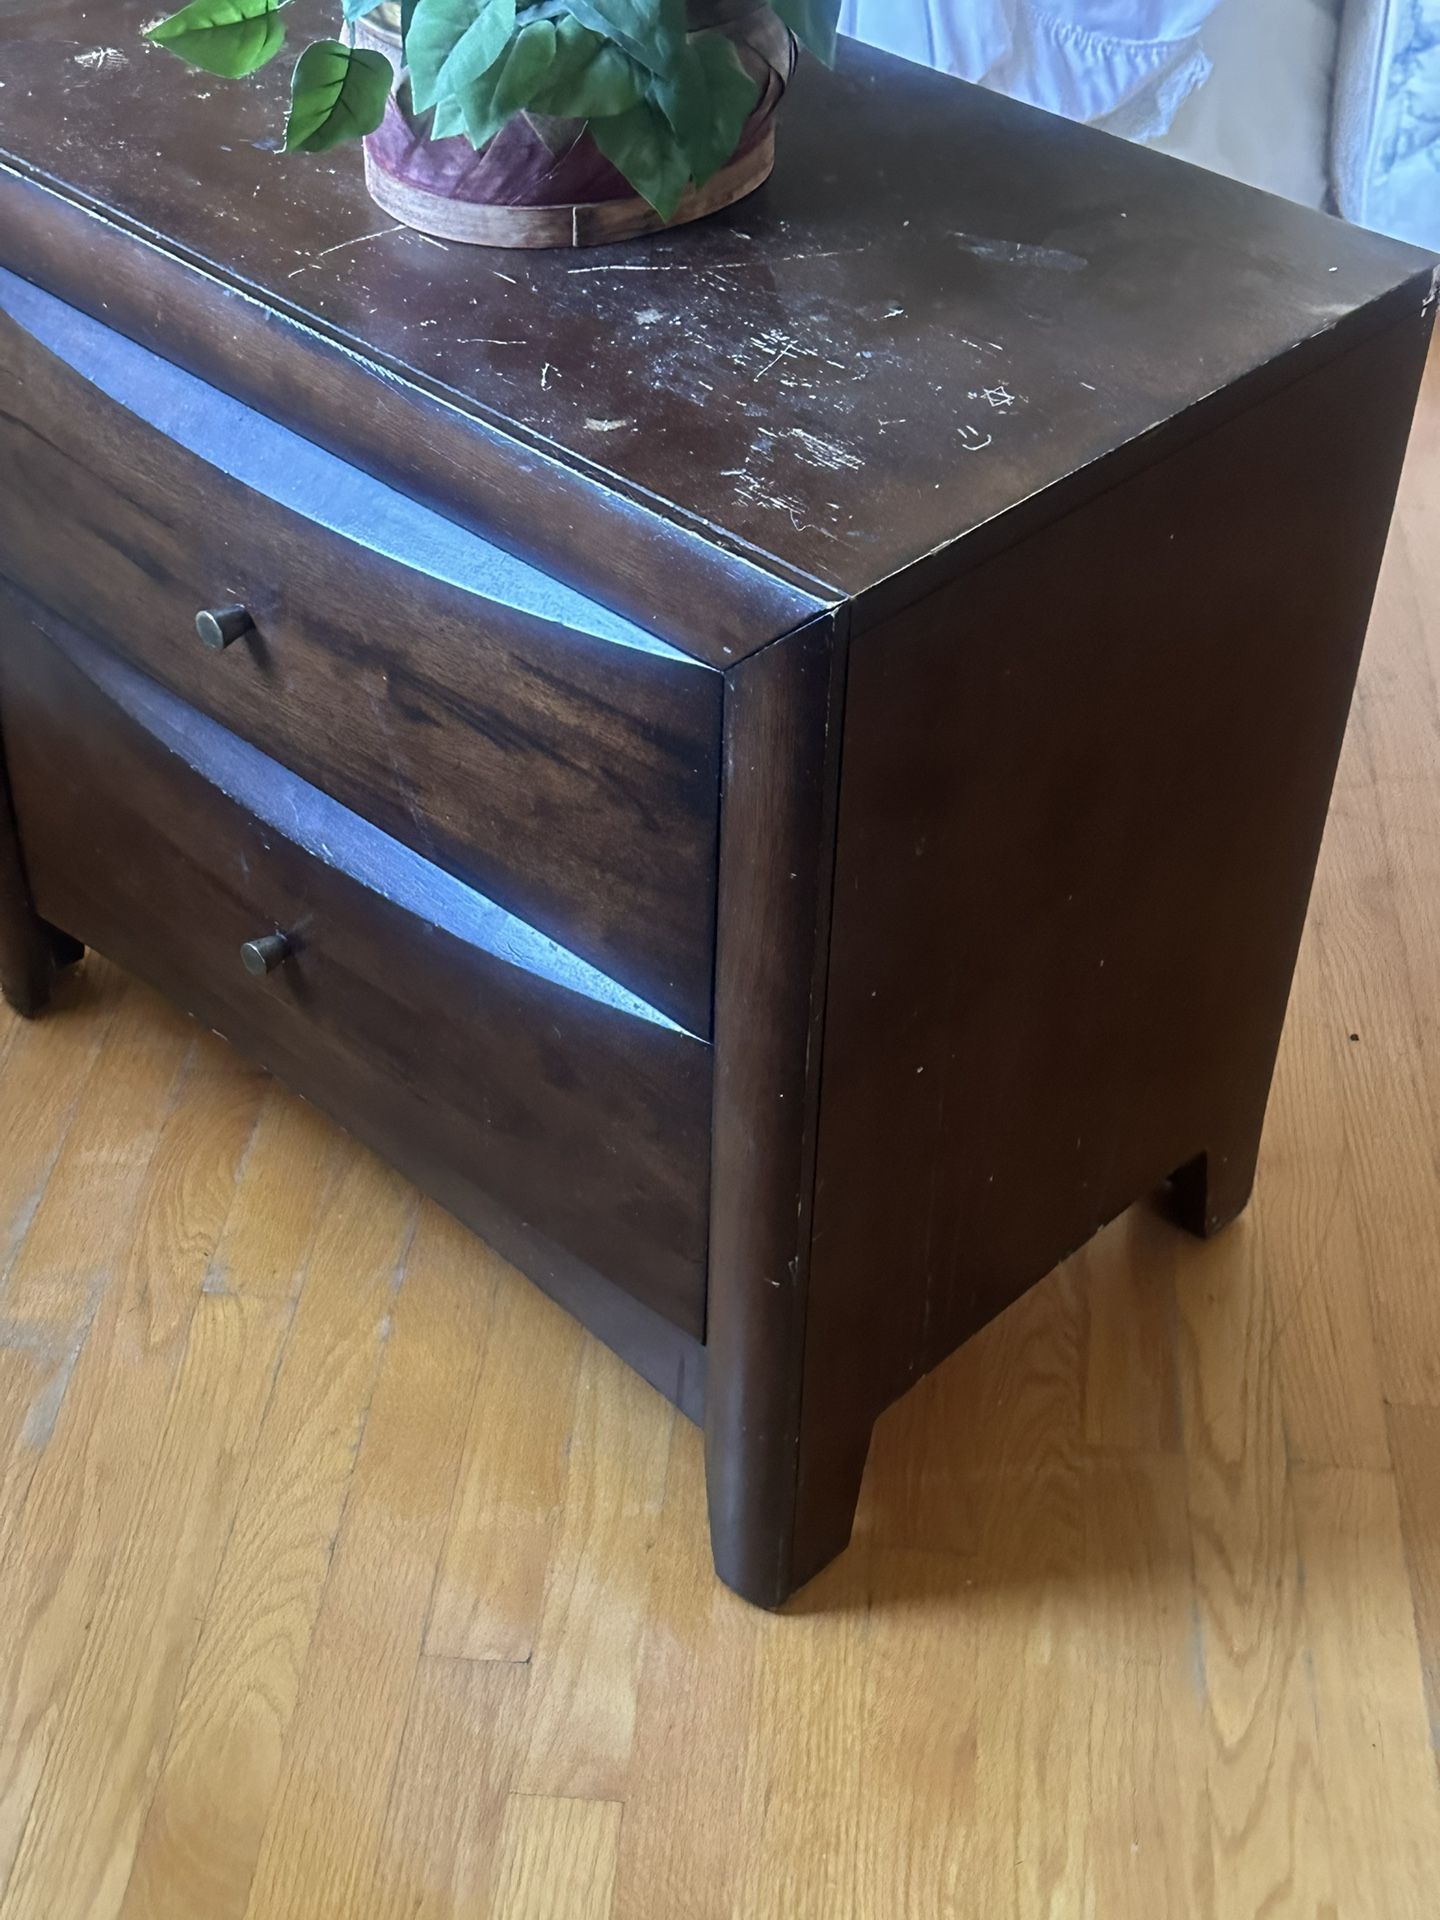 Free End Tables 